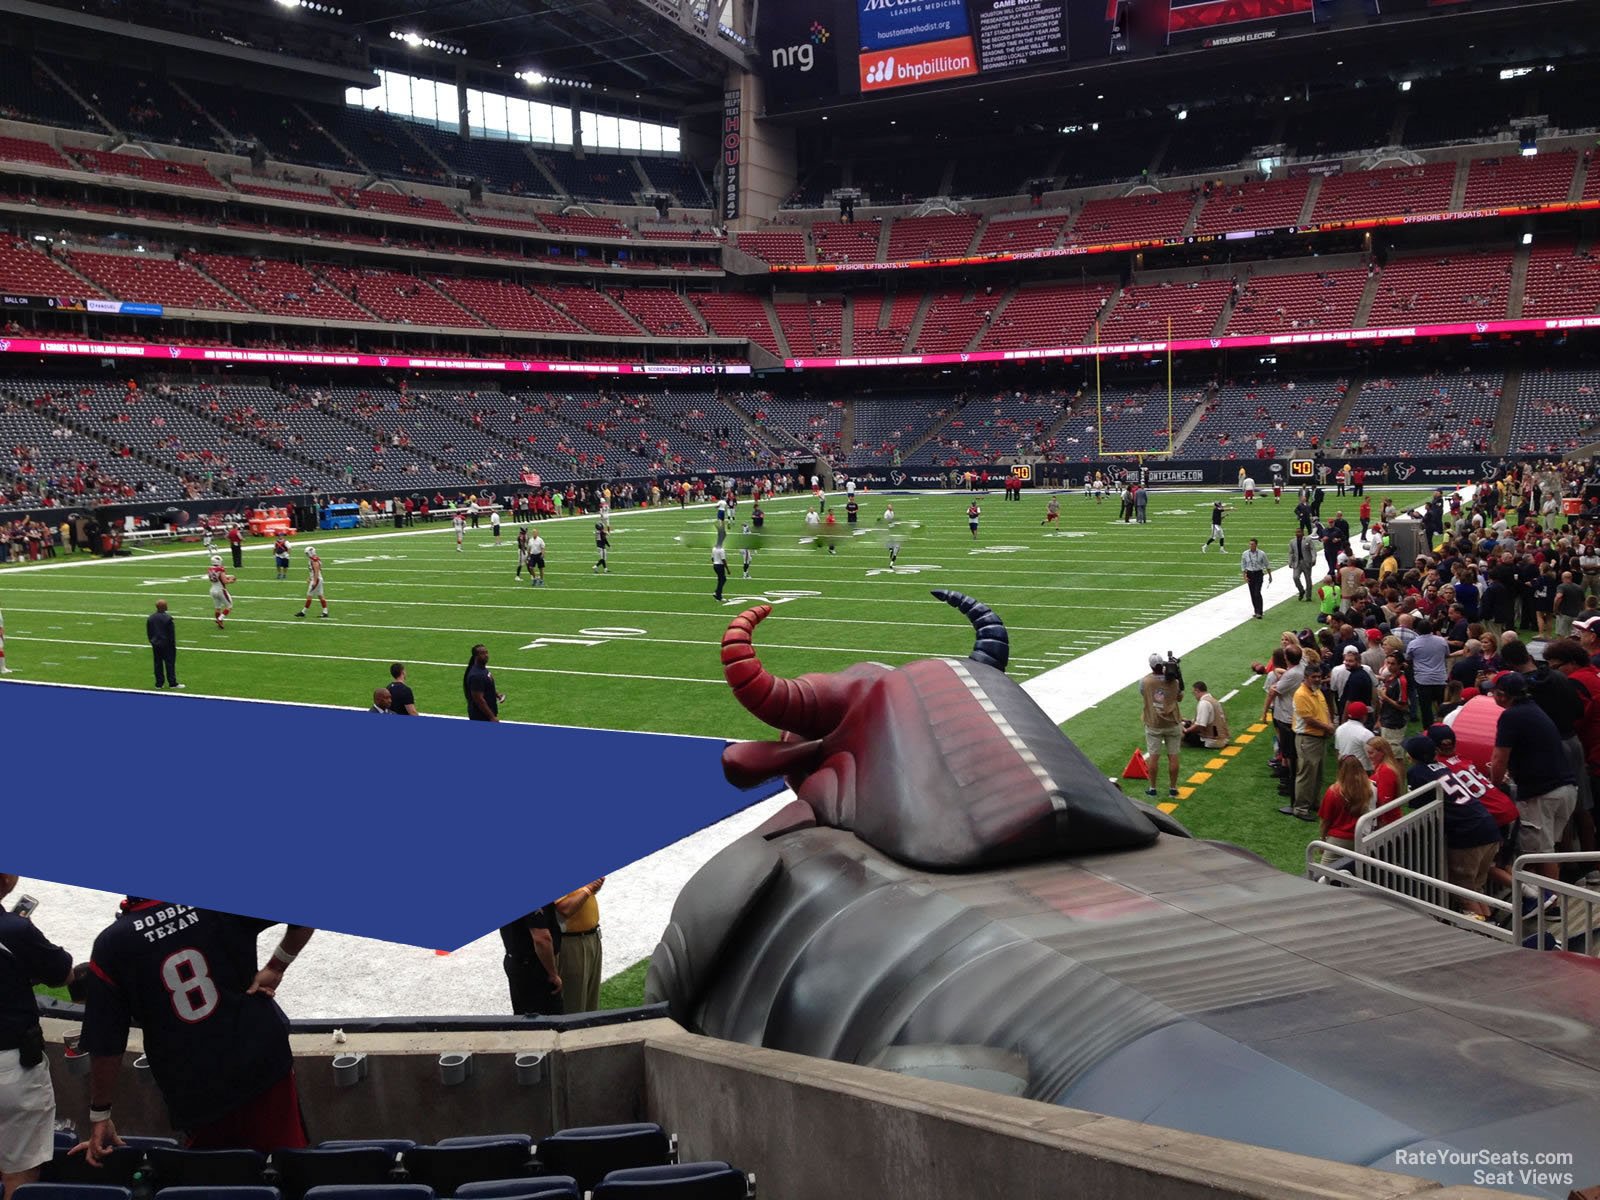 section 113, row h seat view  for football - nrg stadium